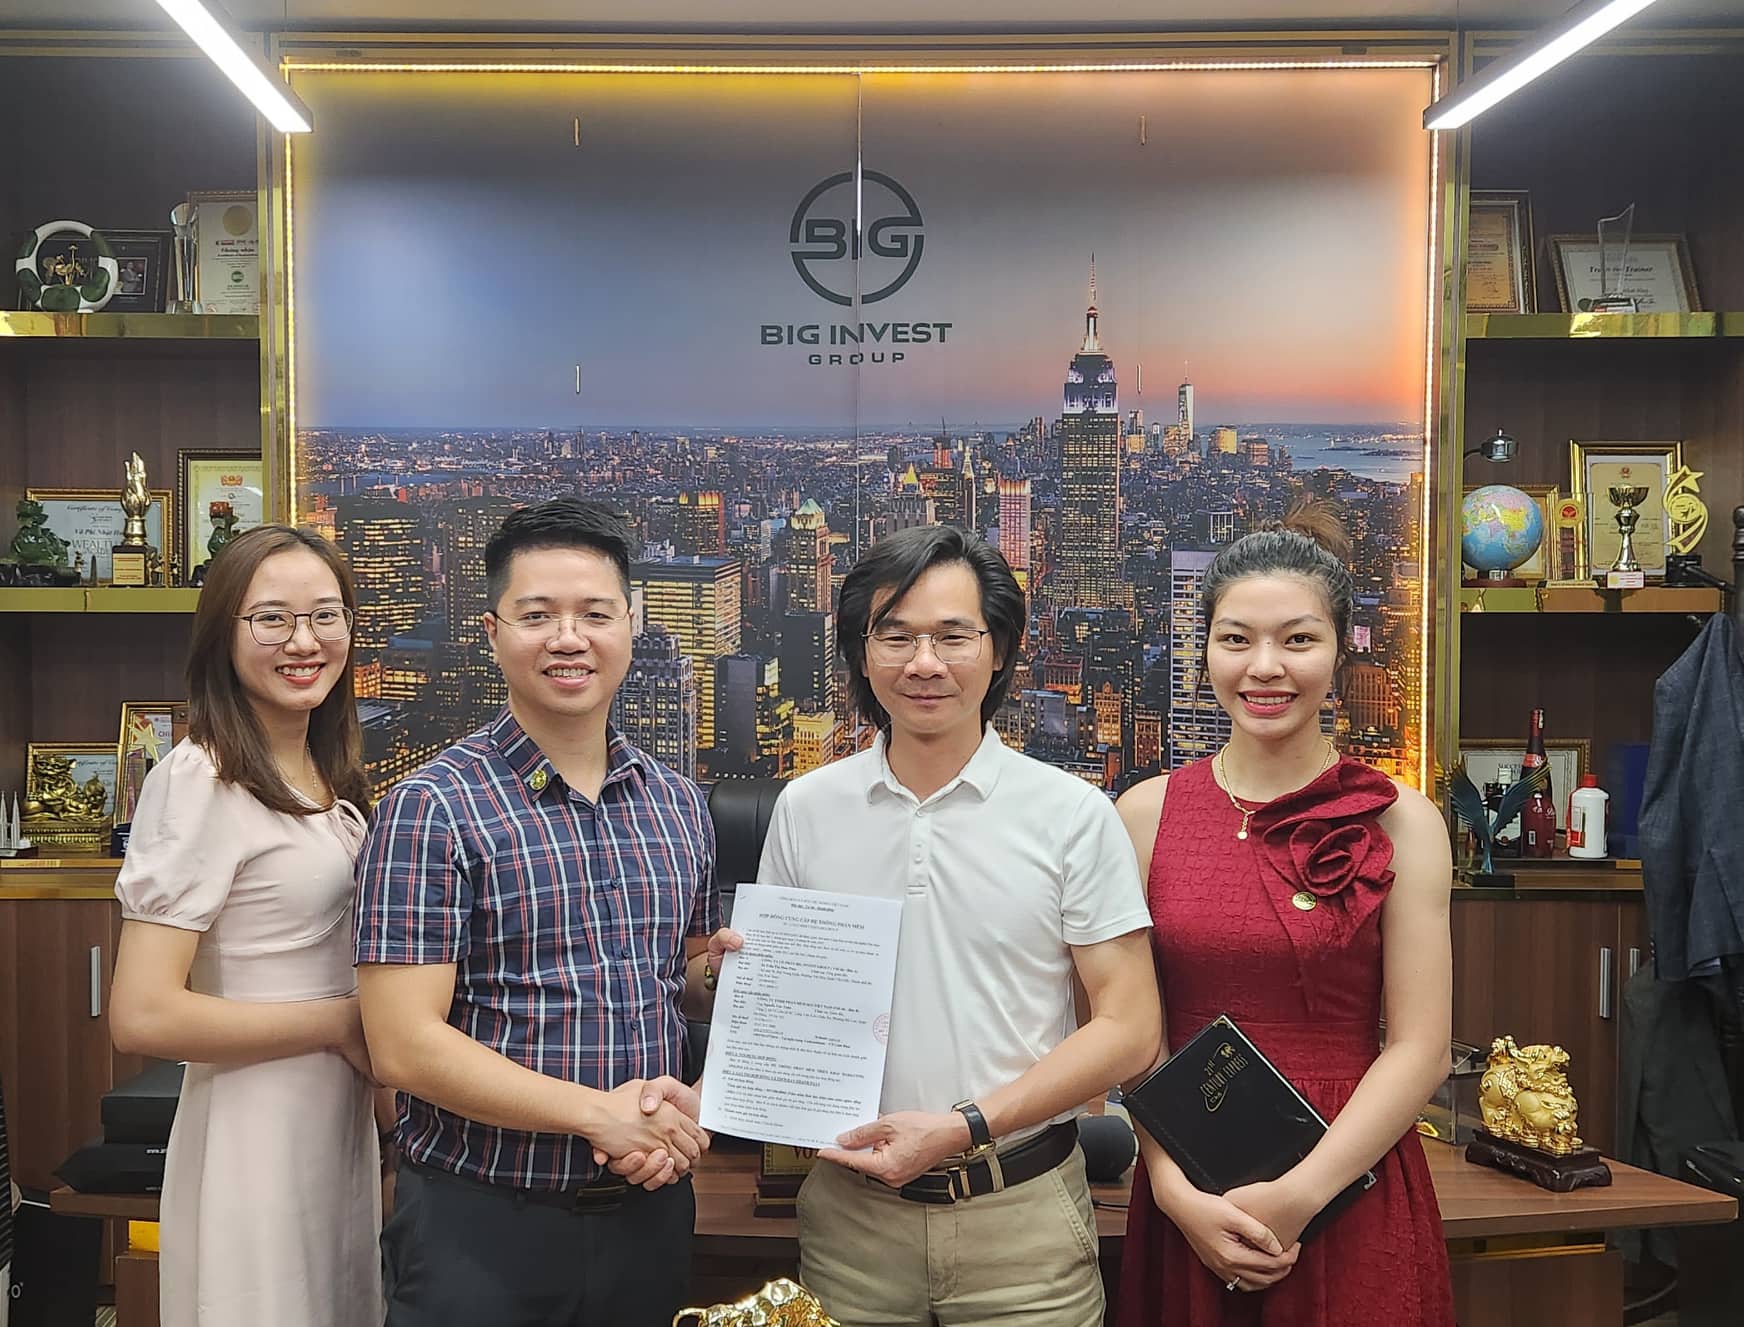 Big Invest Group invites expert Tuan Nguyen to be a Marketing Advisor